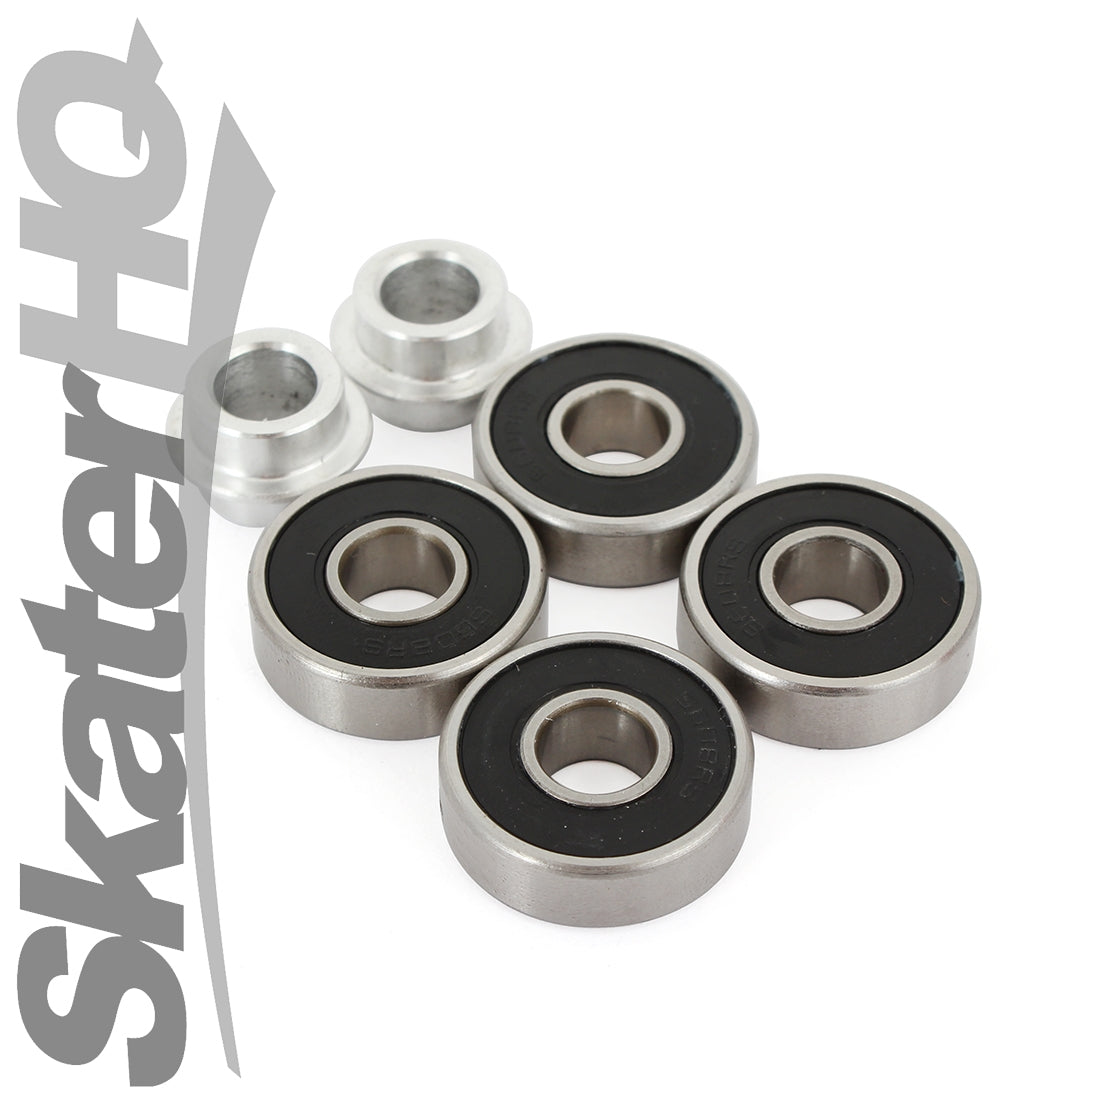 Apex Steel/Ceramic Bearing Kit - 4pk- SALE Scooter Hardware and Parts